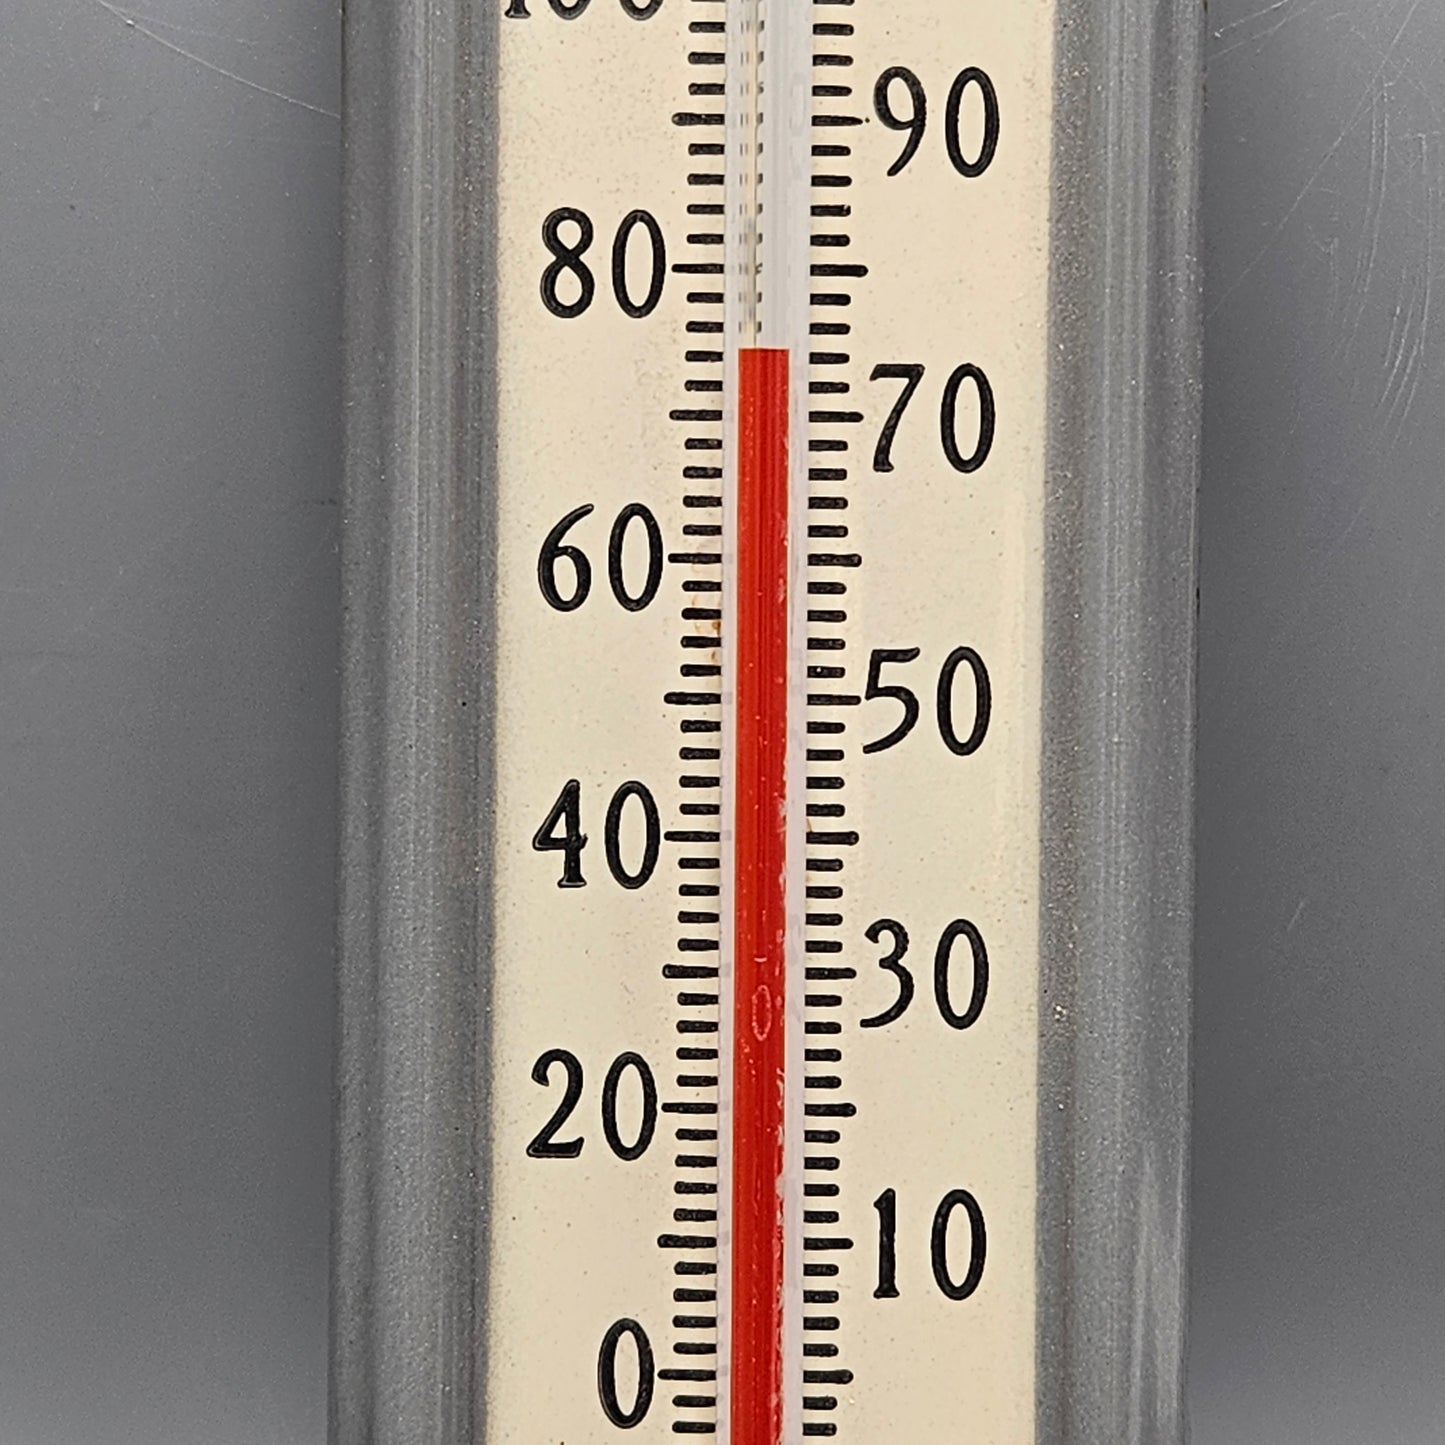 Taylor Enamel Outdoor Thermometer